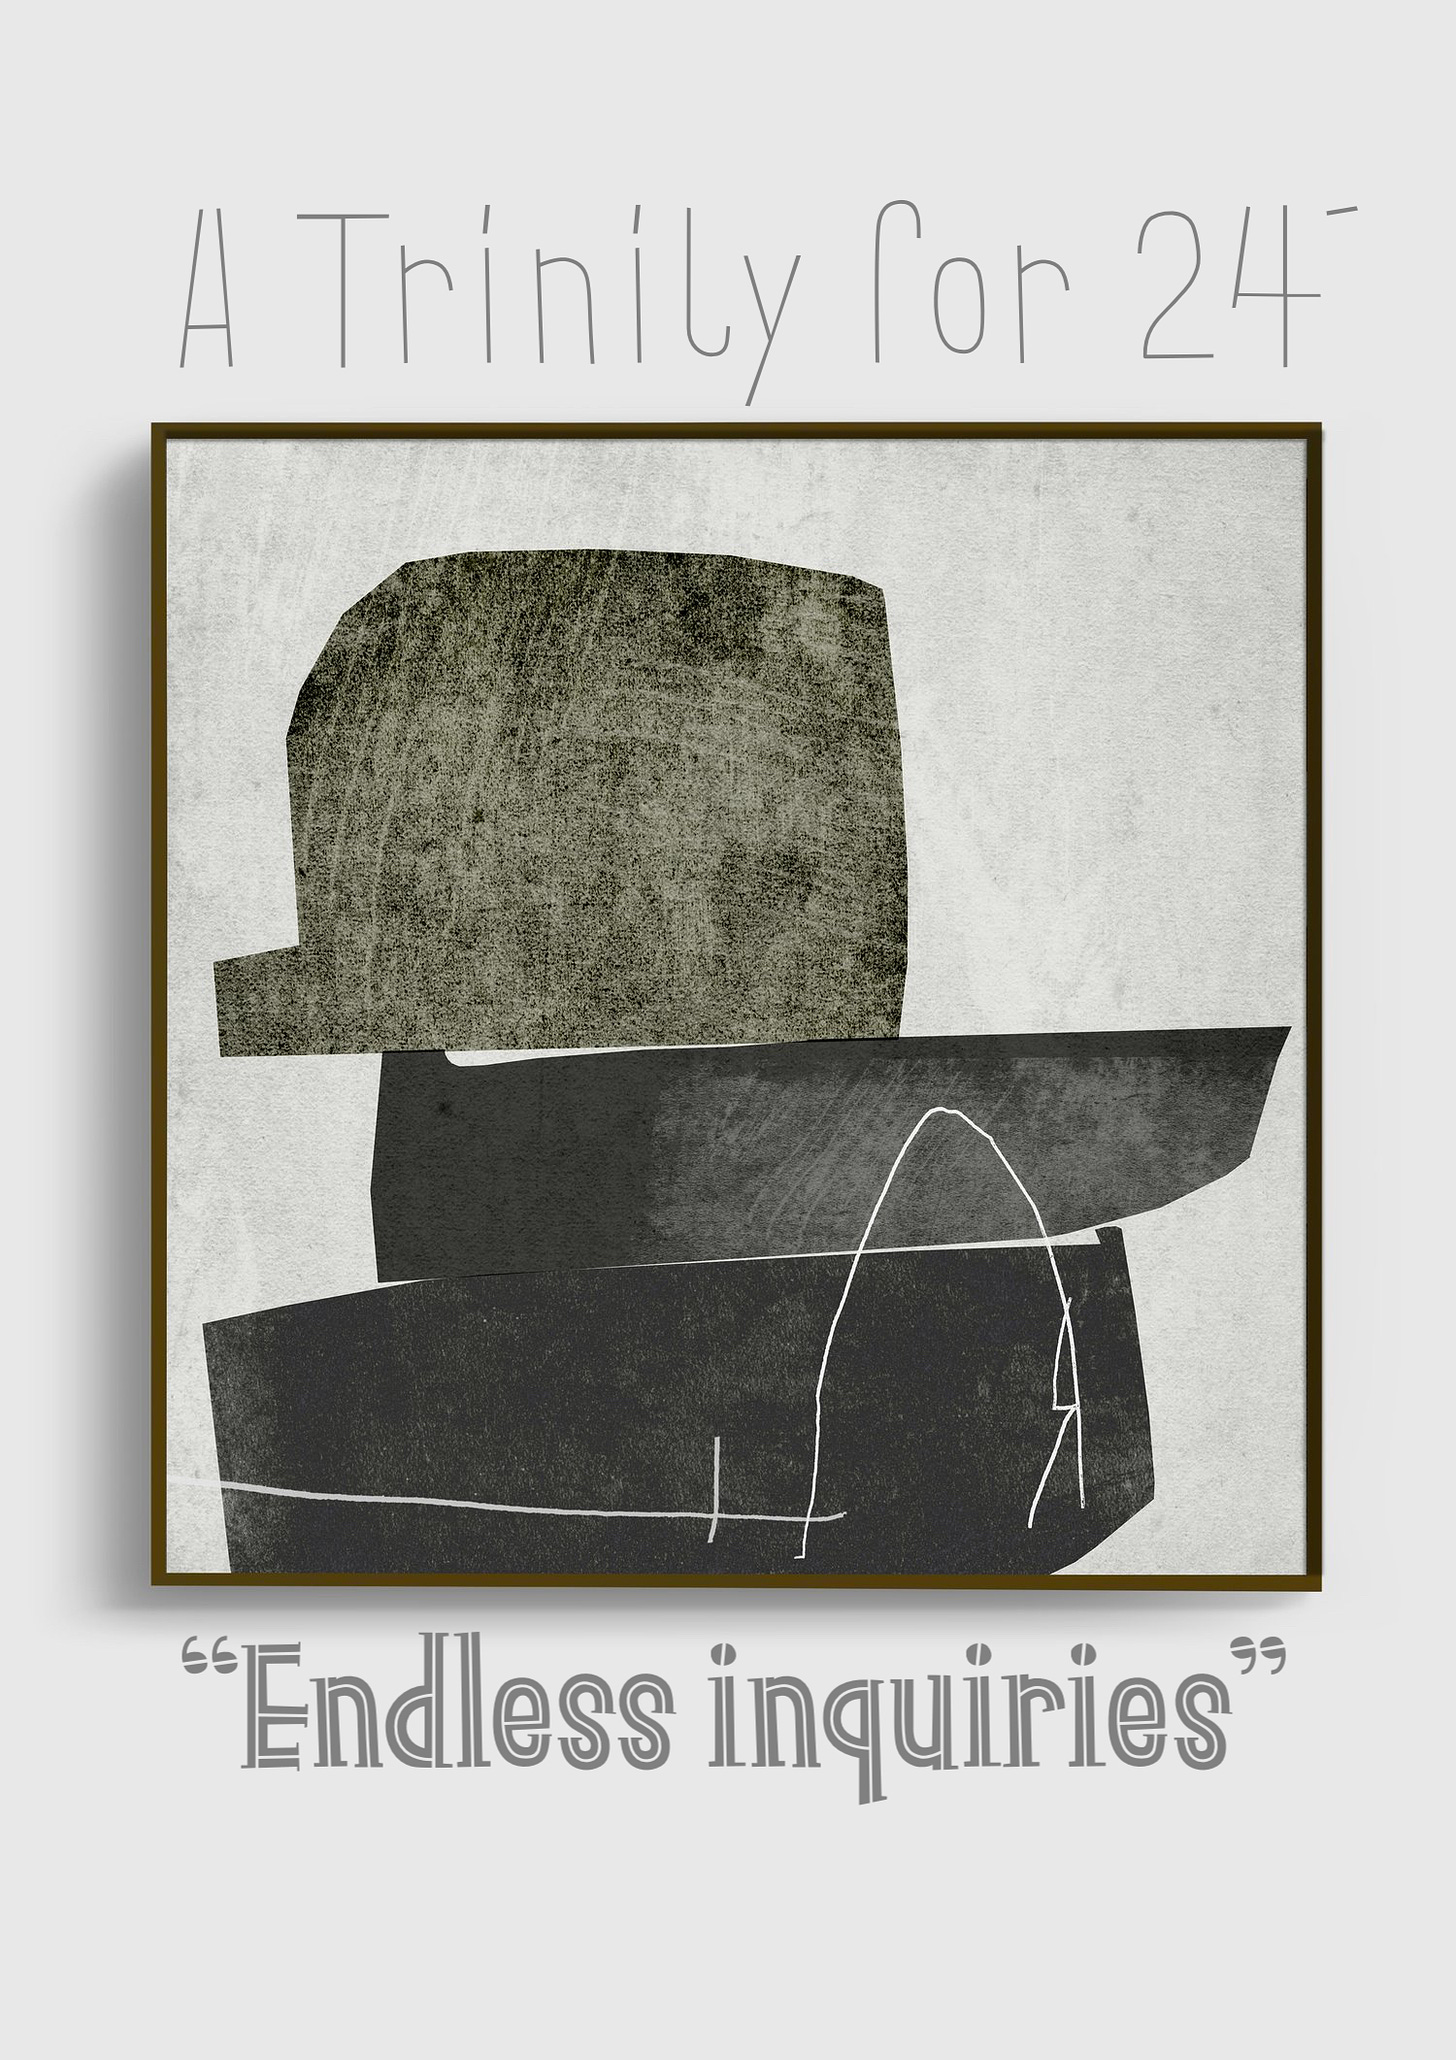 A Trinity for 24' "Endless Inquiries"